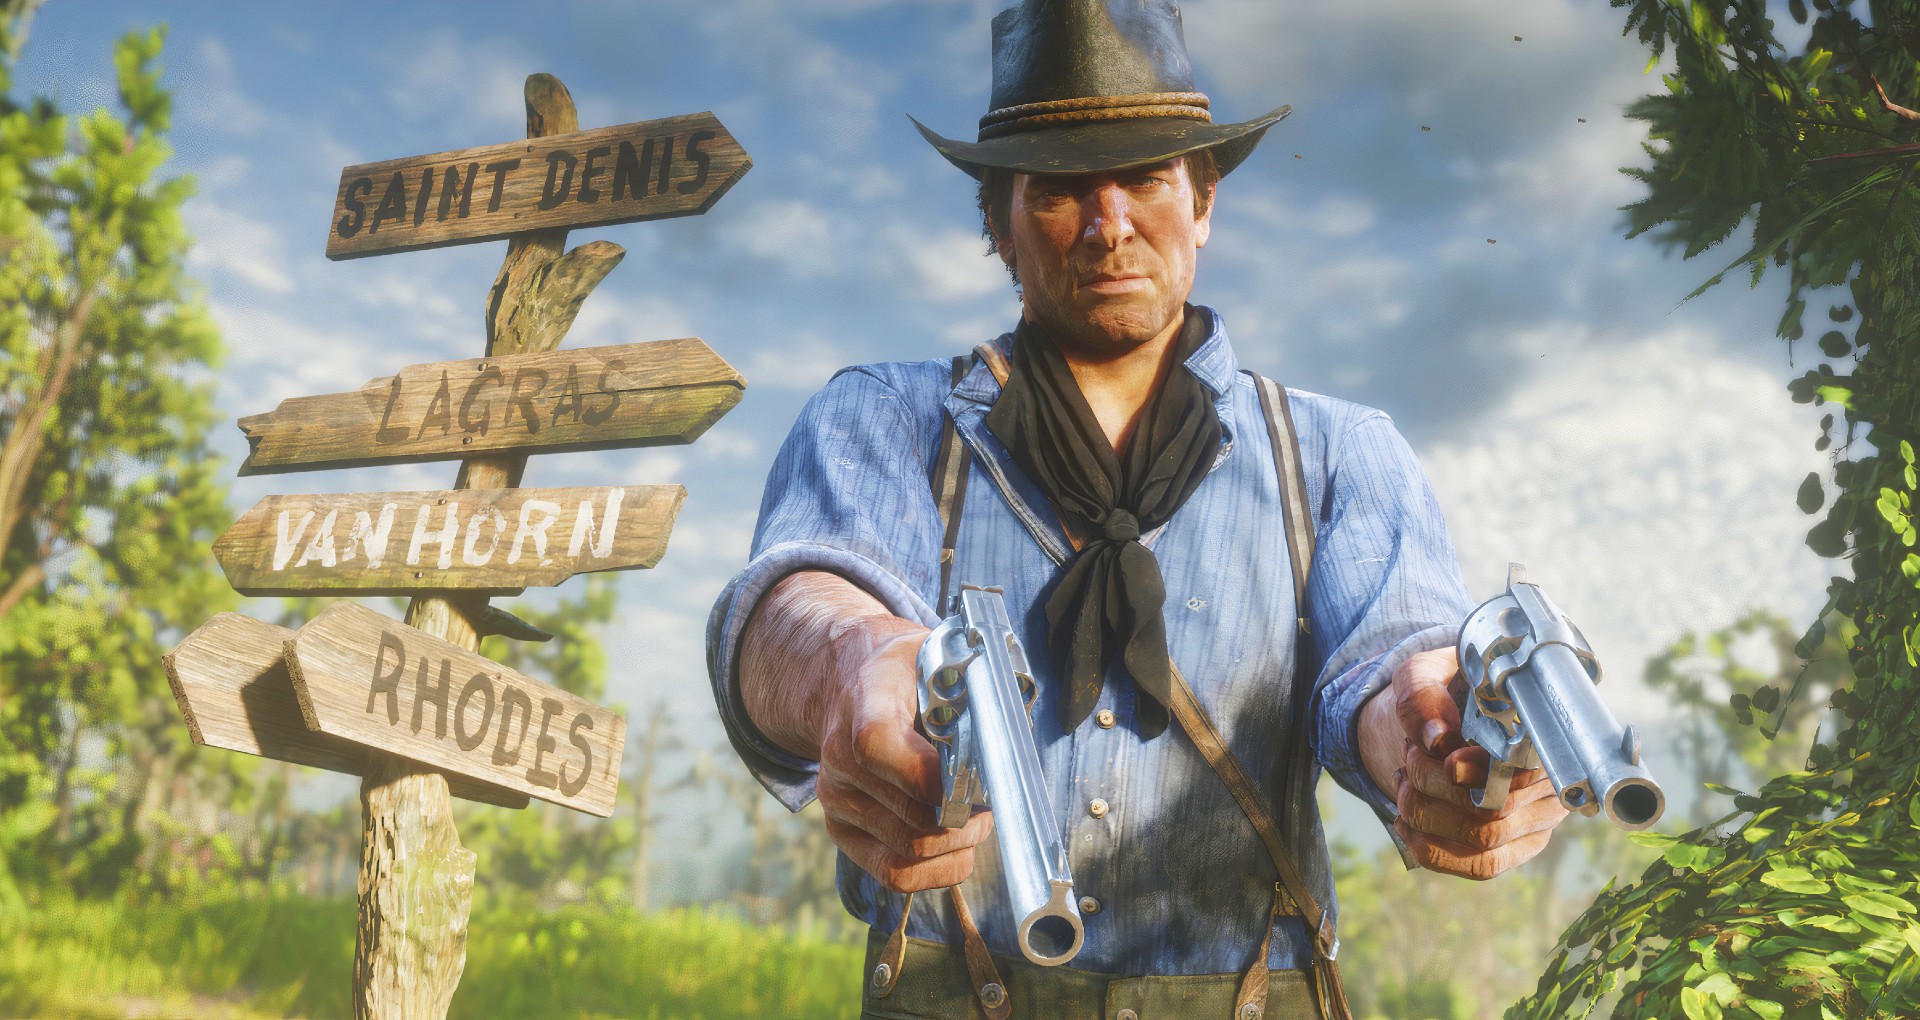 Red Dead Redemption 2 player punished by Rockstar for reporting cheats